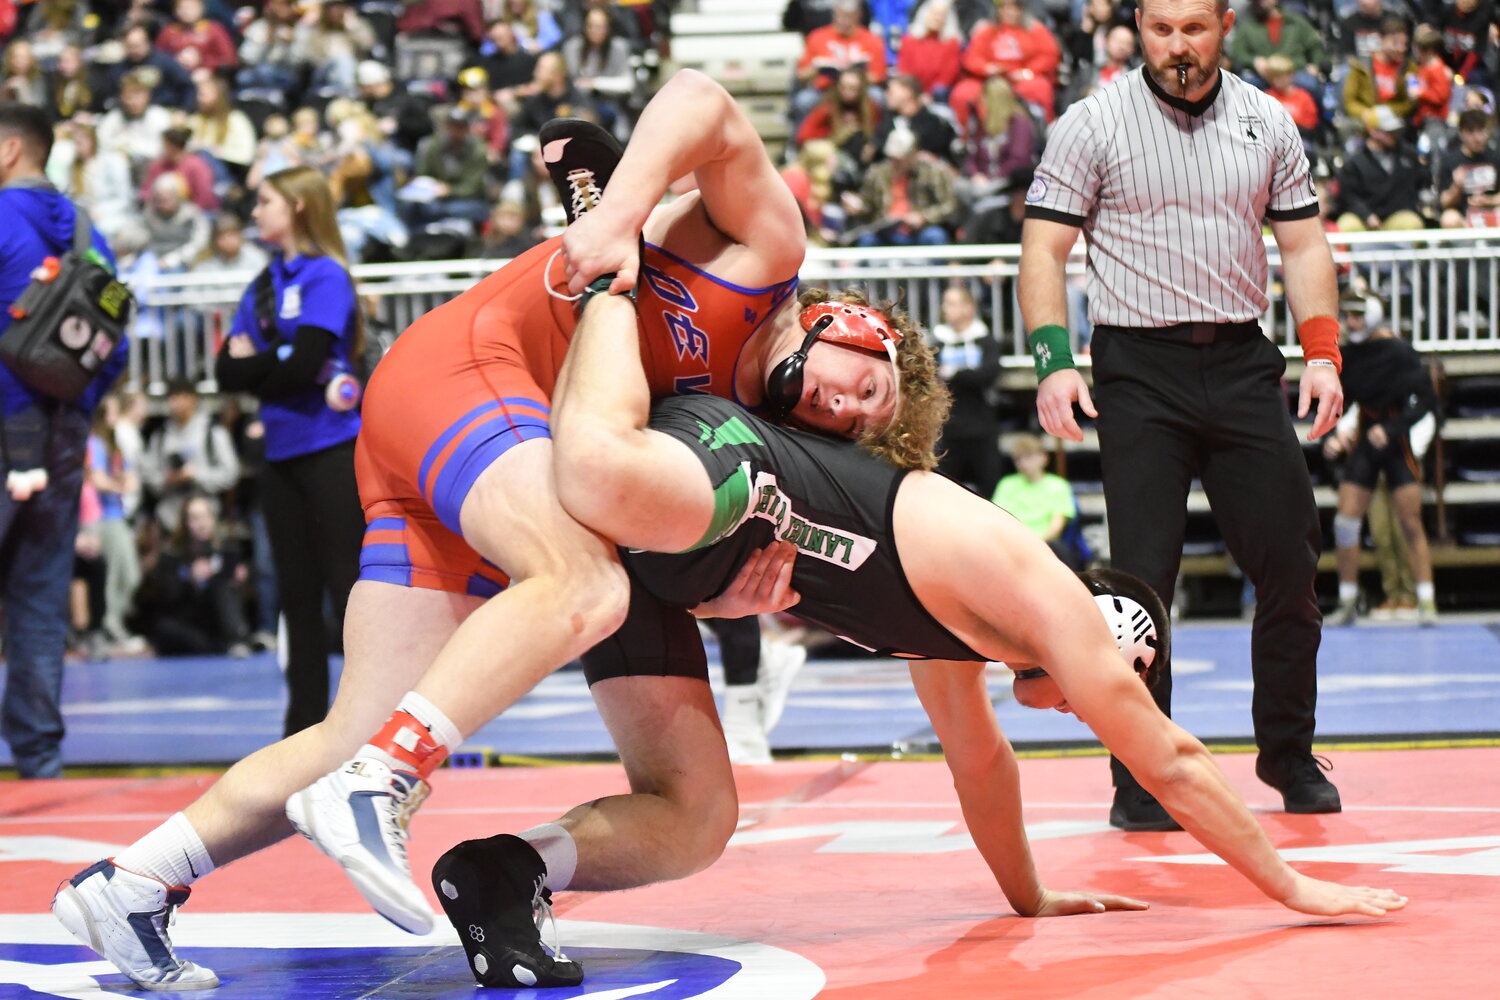 Red Devil 190-pounder Aiden Liechty takes control of Riverton’s Jordan May in the semifinals of the 3A State Wrestling Championships in Casper. Liechty finished second overall for the tournament.